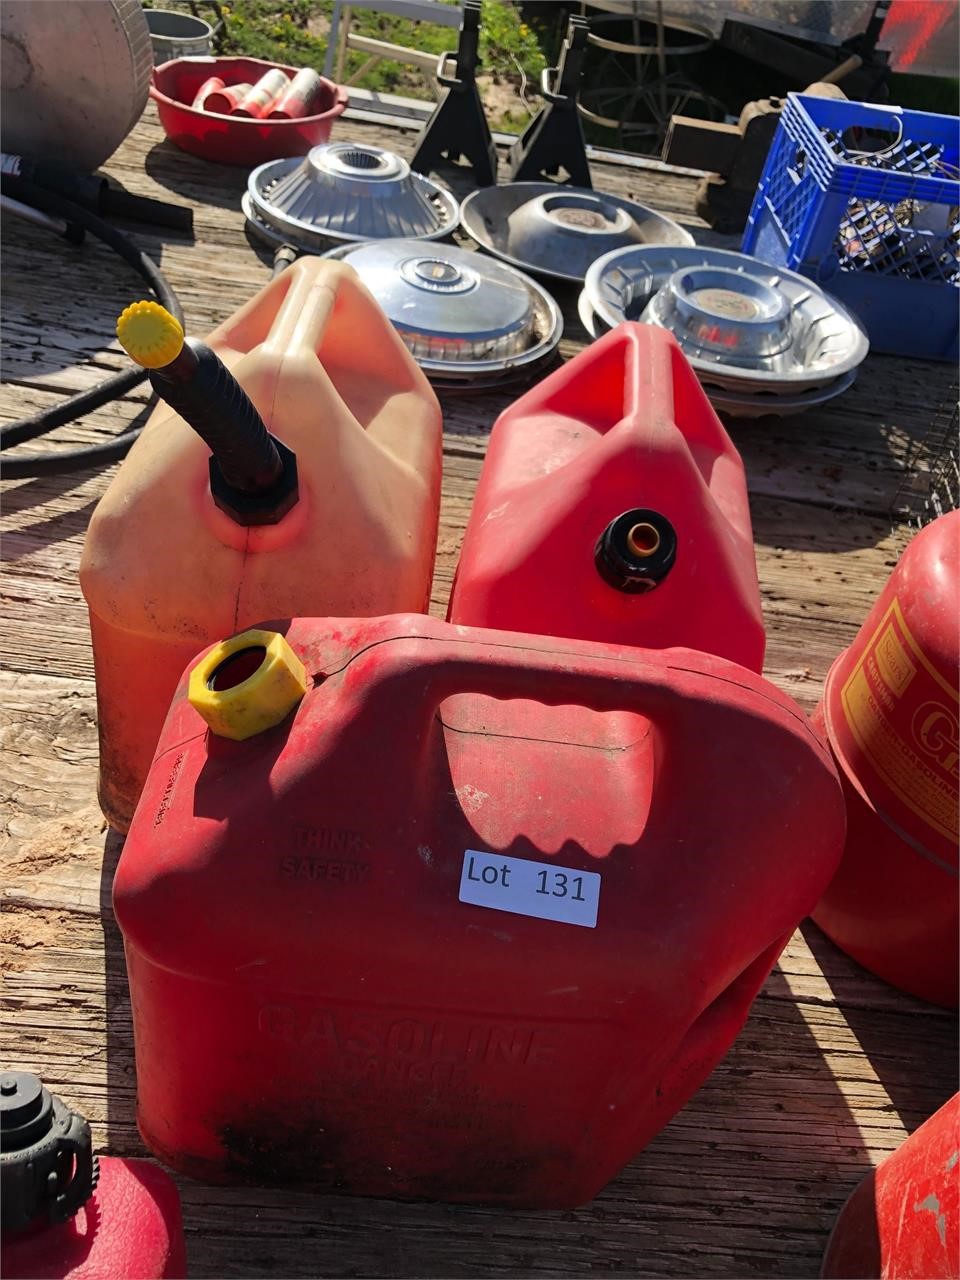 Lot of Gas Cans